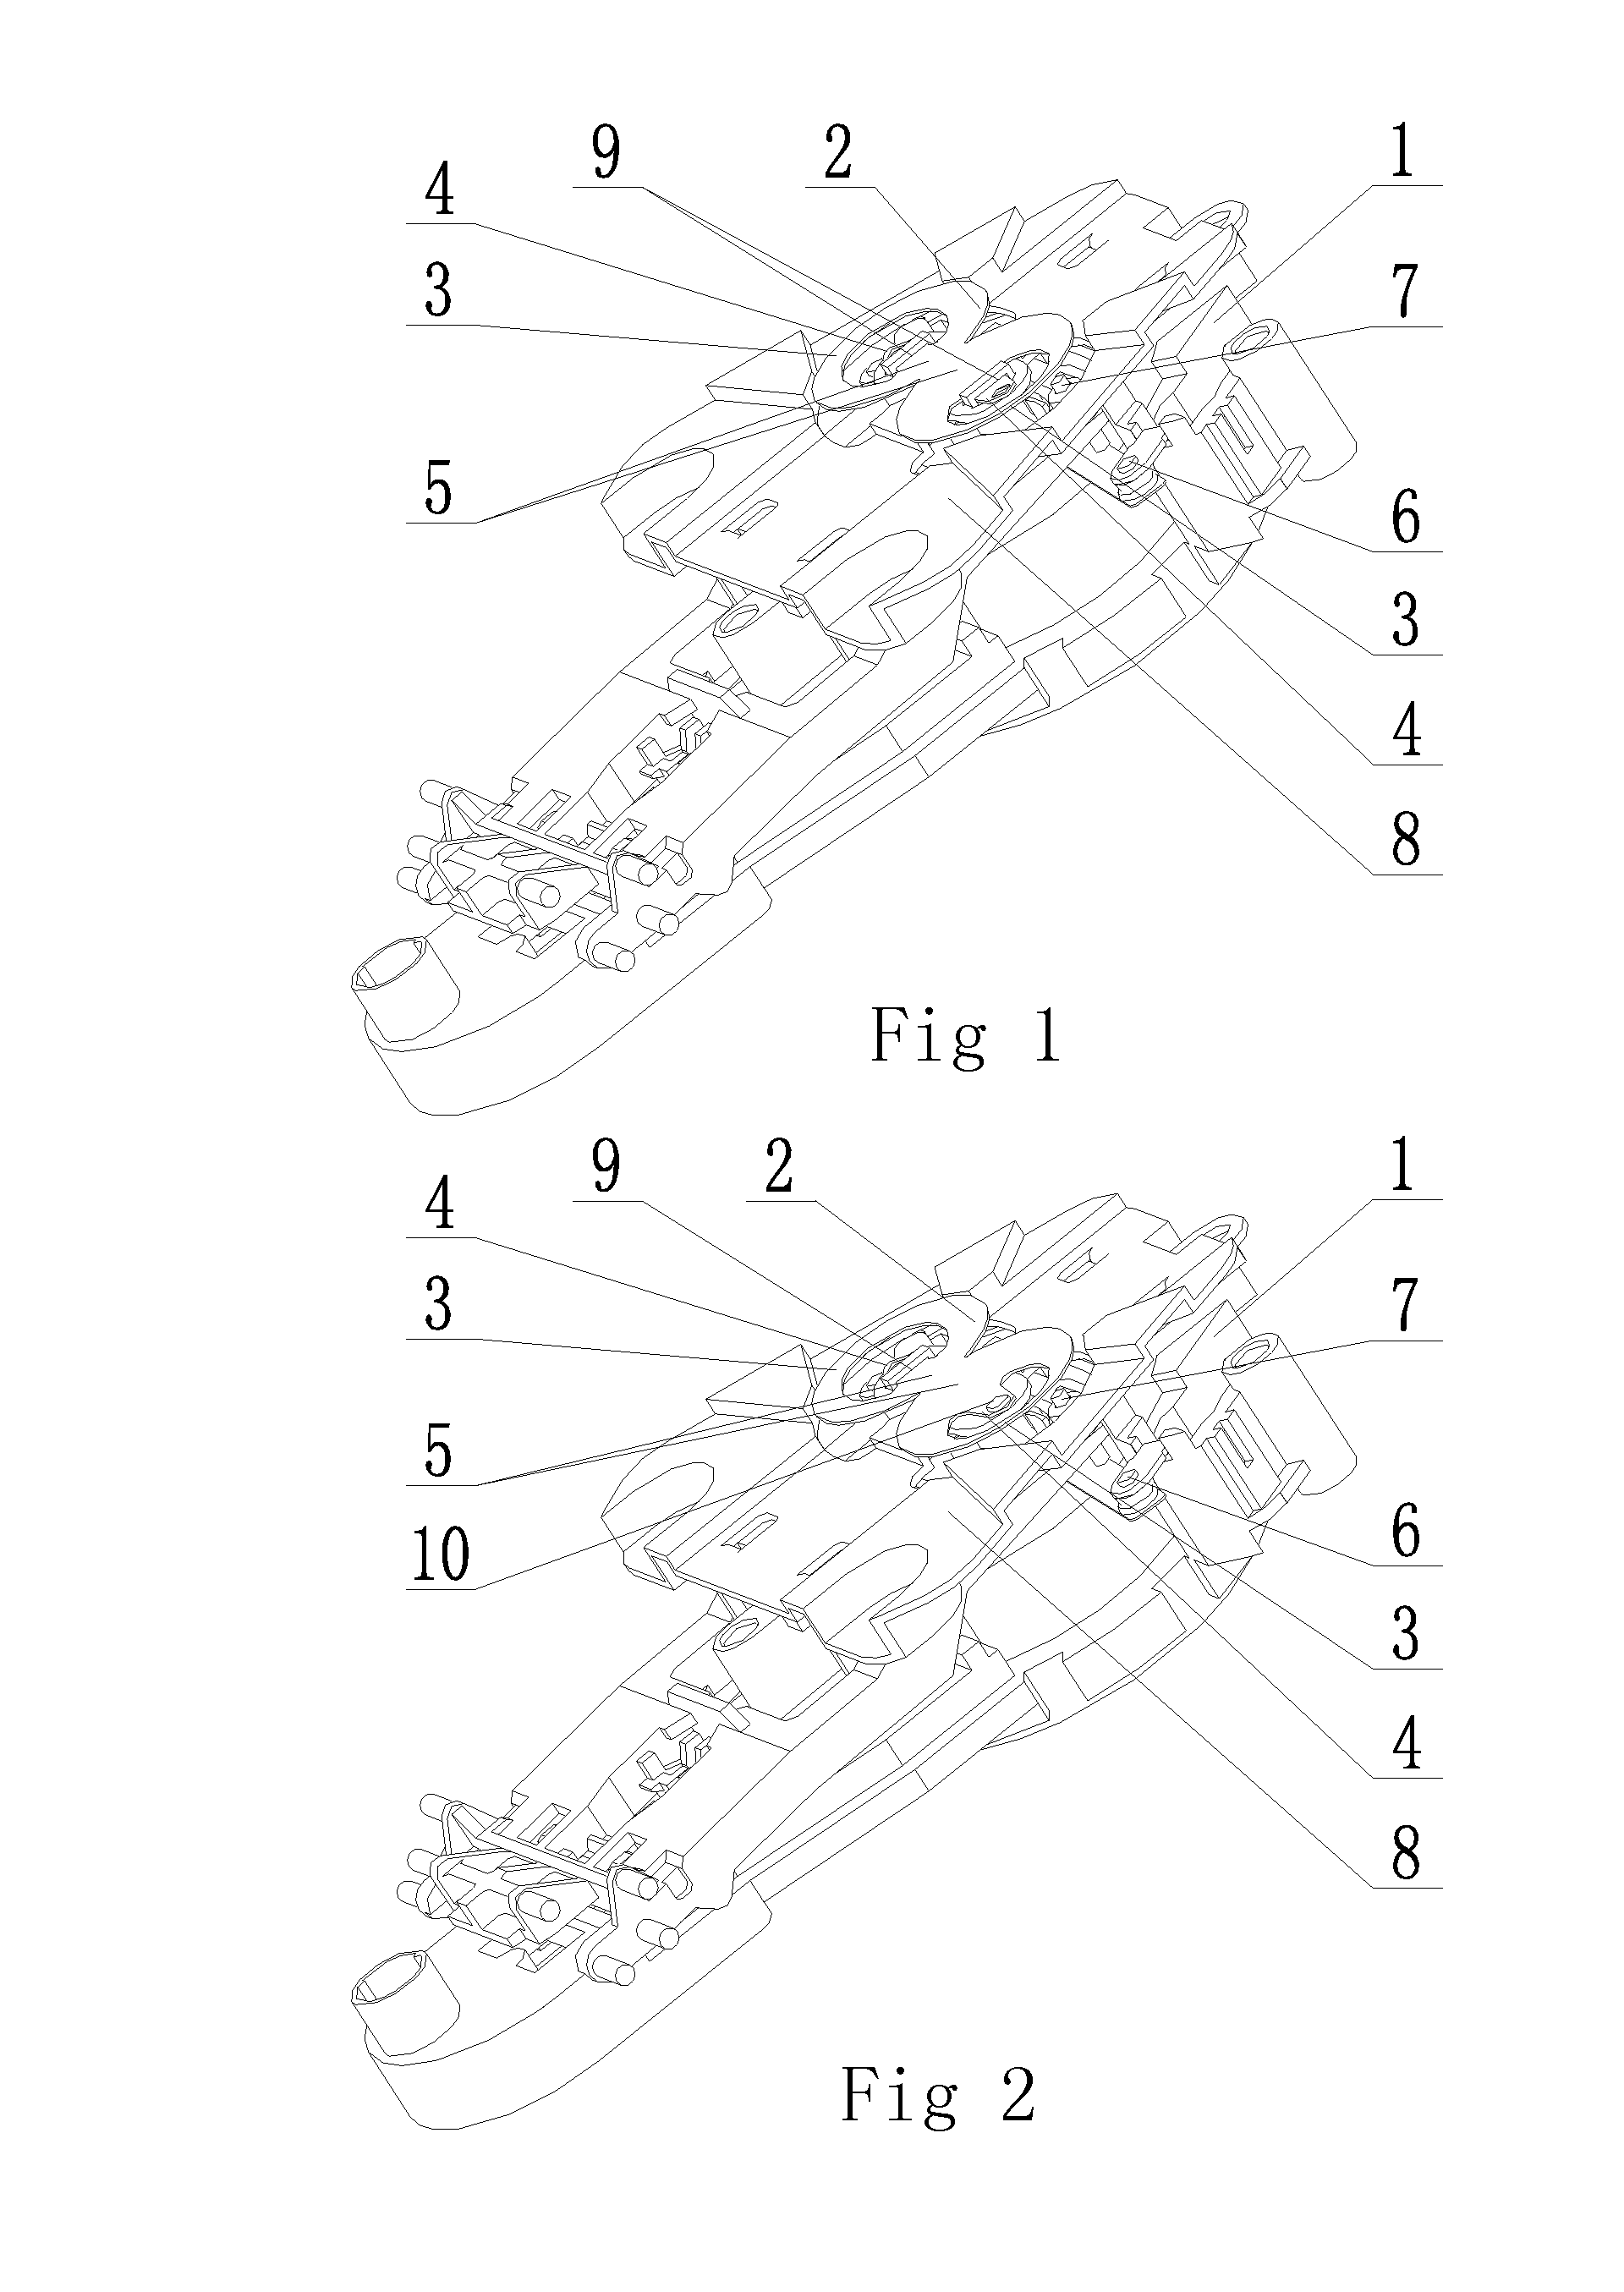 Overheat Protection Control Component for Liquid Heating Vessel